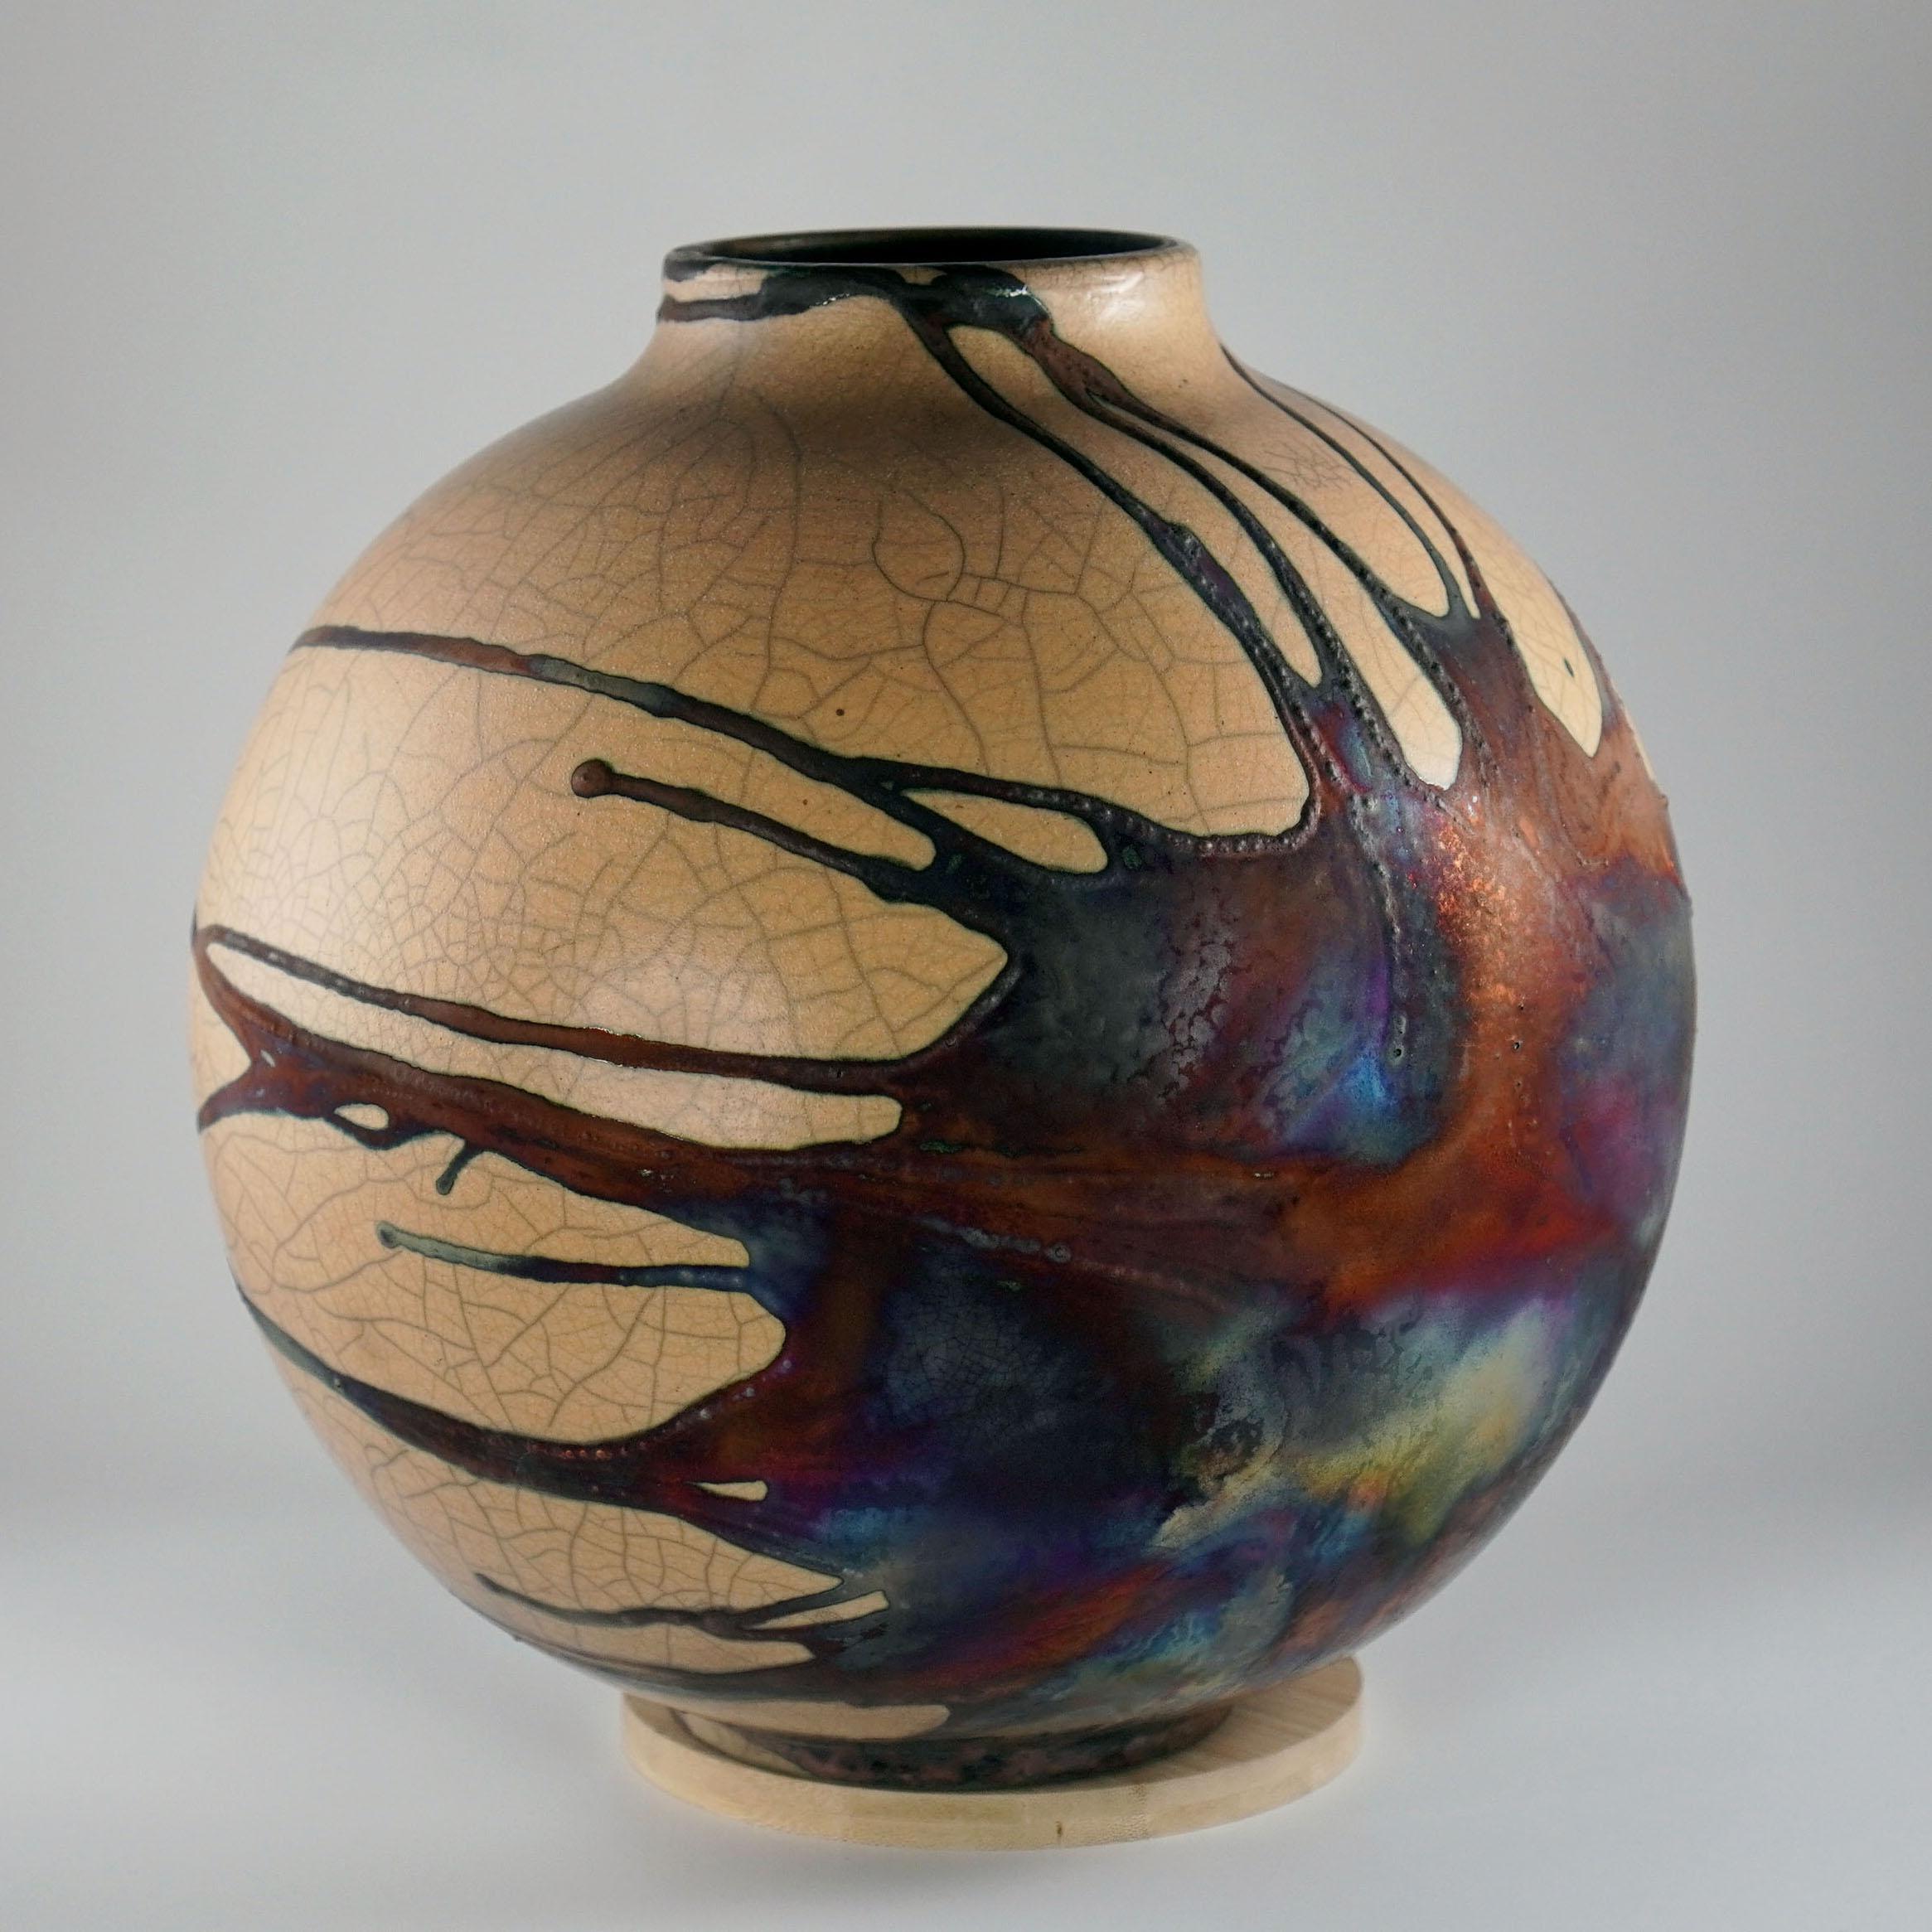 A mesmerizing sight to behold as soon as the rainbow-like patinas catch your eye. This Globe Vase is a round, capacious piece produced using the Raku technique, resulting in a beautiful unpredictable finish. This vase would be the perfect